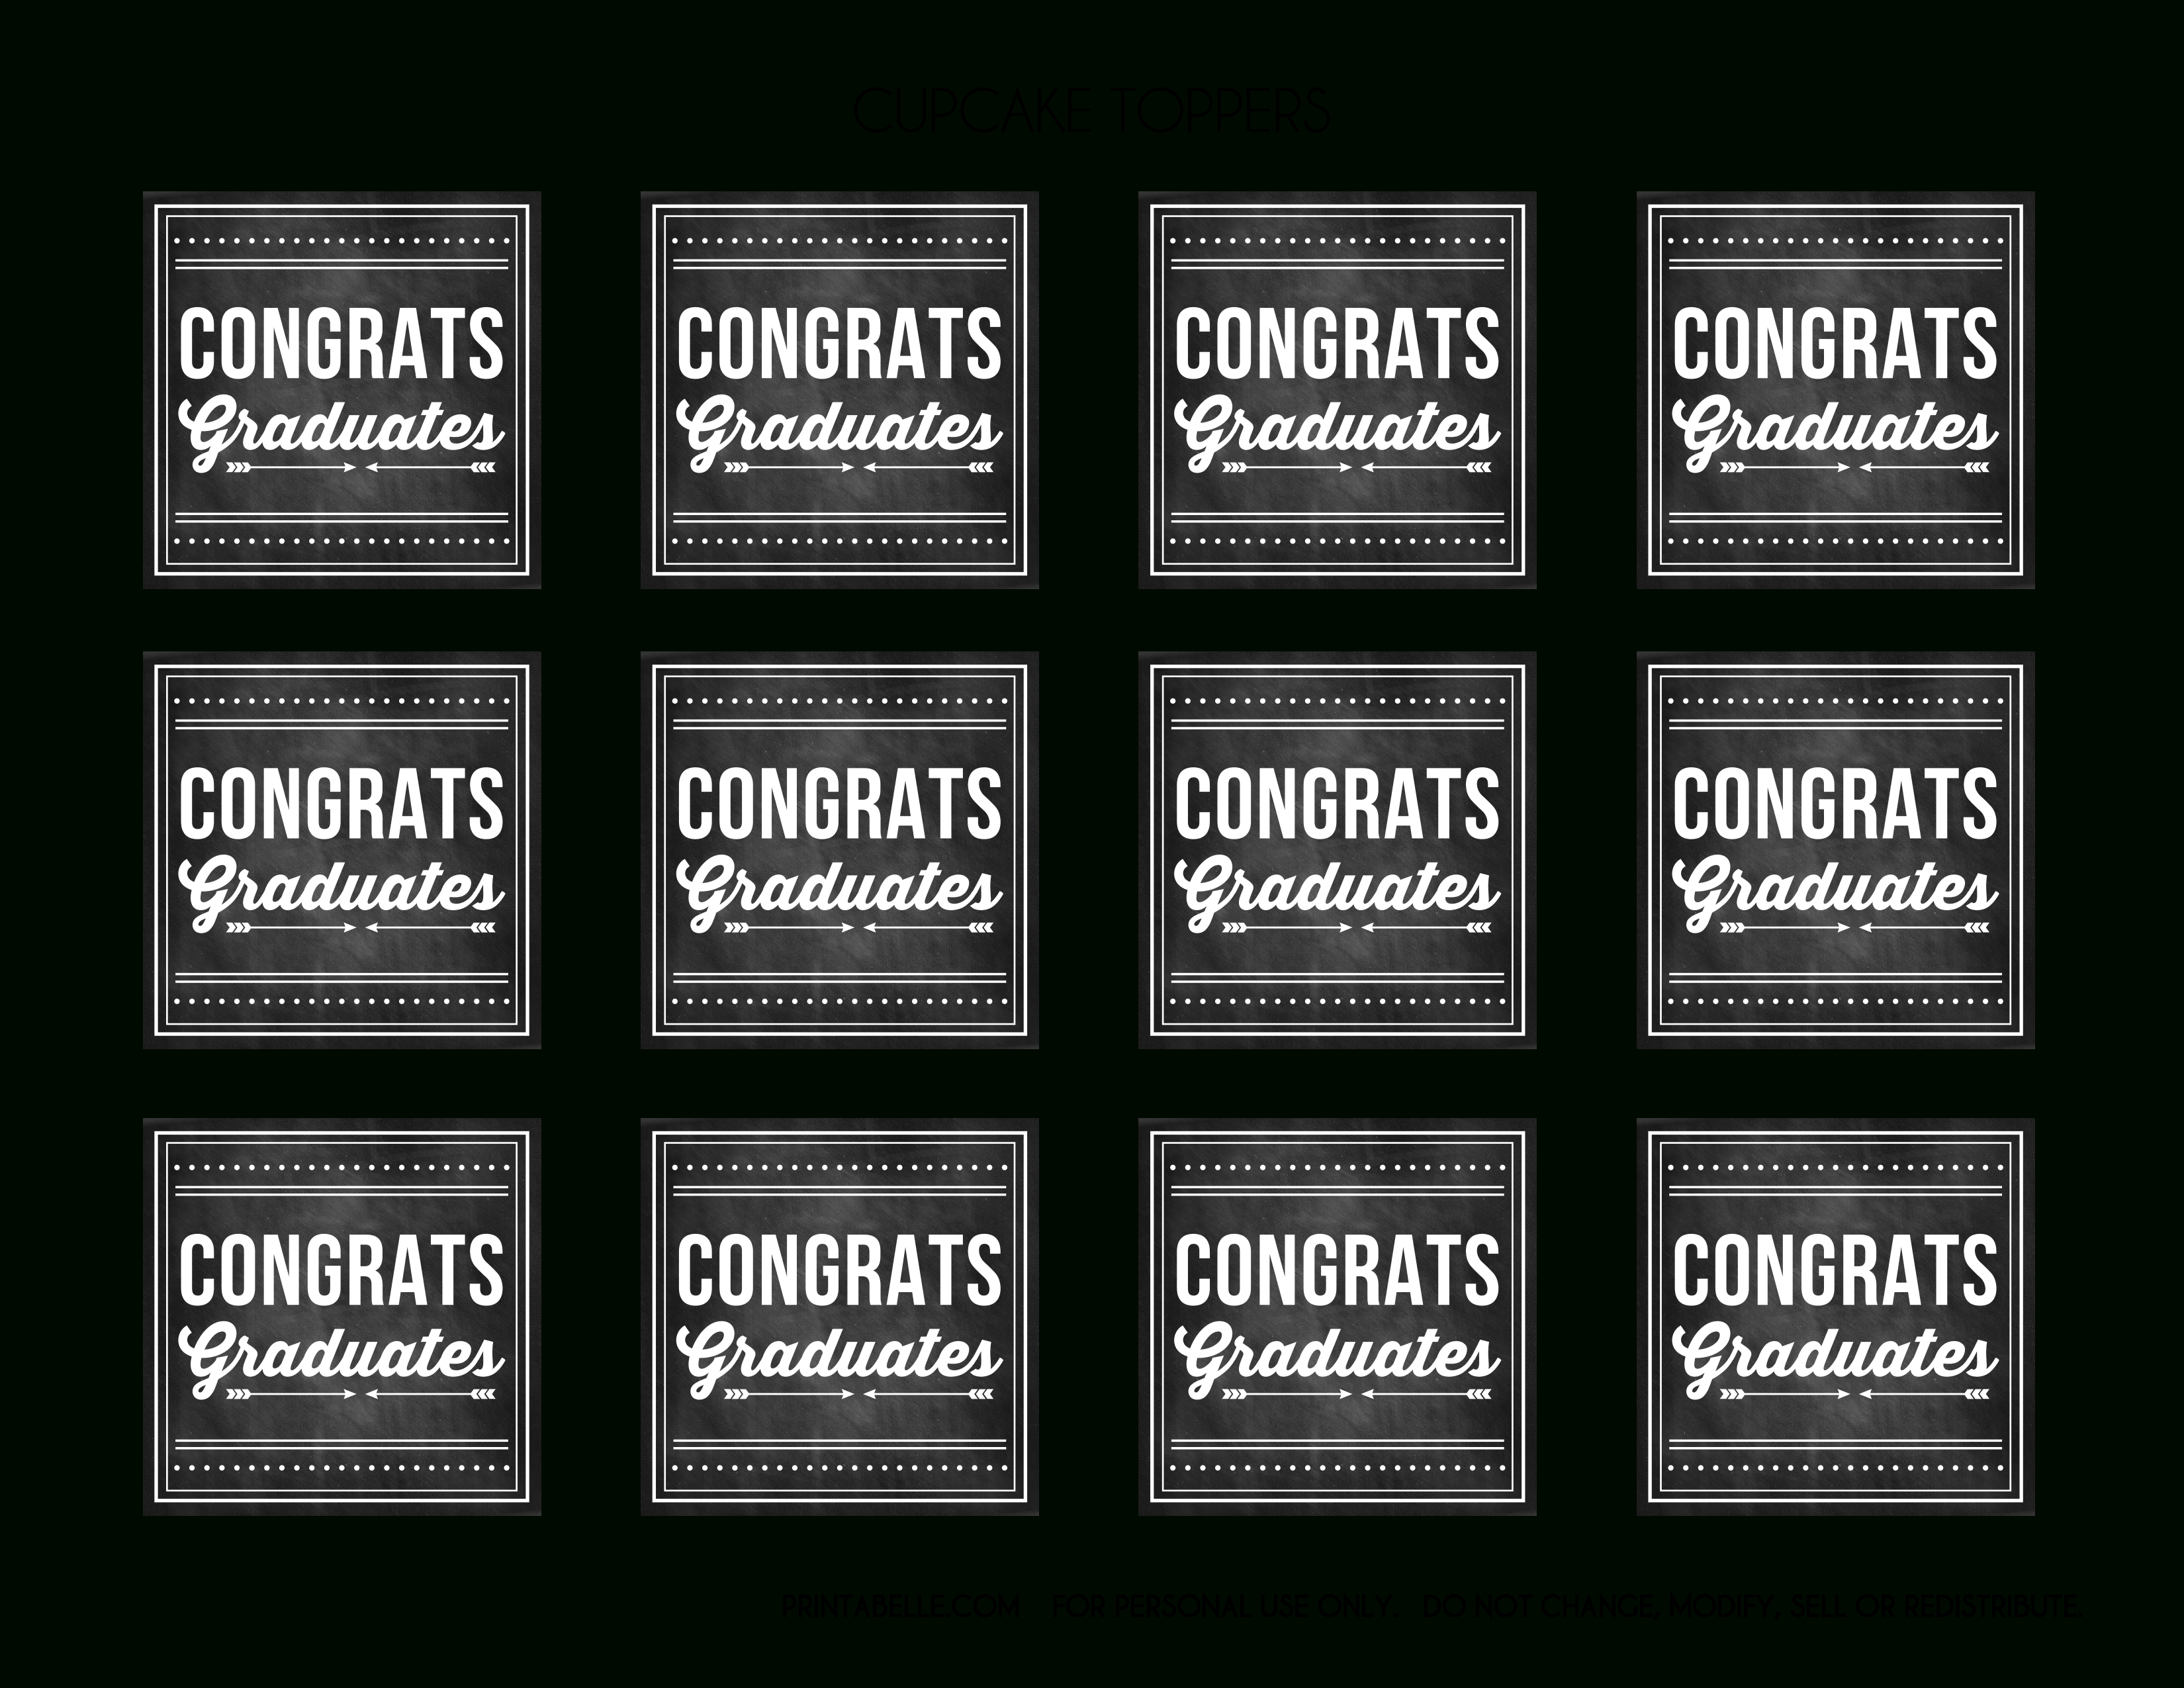 Free Graduation Chalkboard Party Printables From Printabelle | Catch - Free Printable Graduation Address Labels